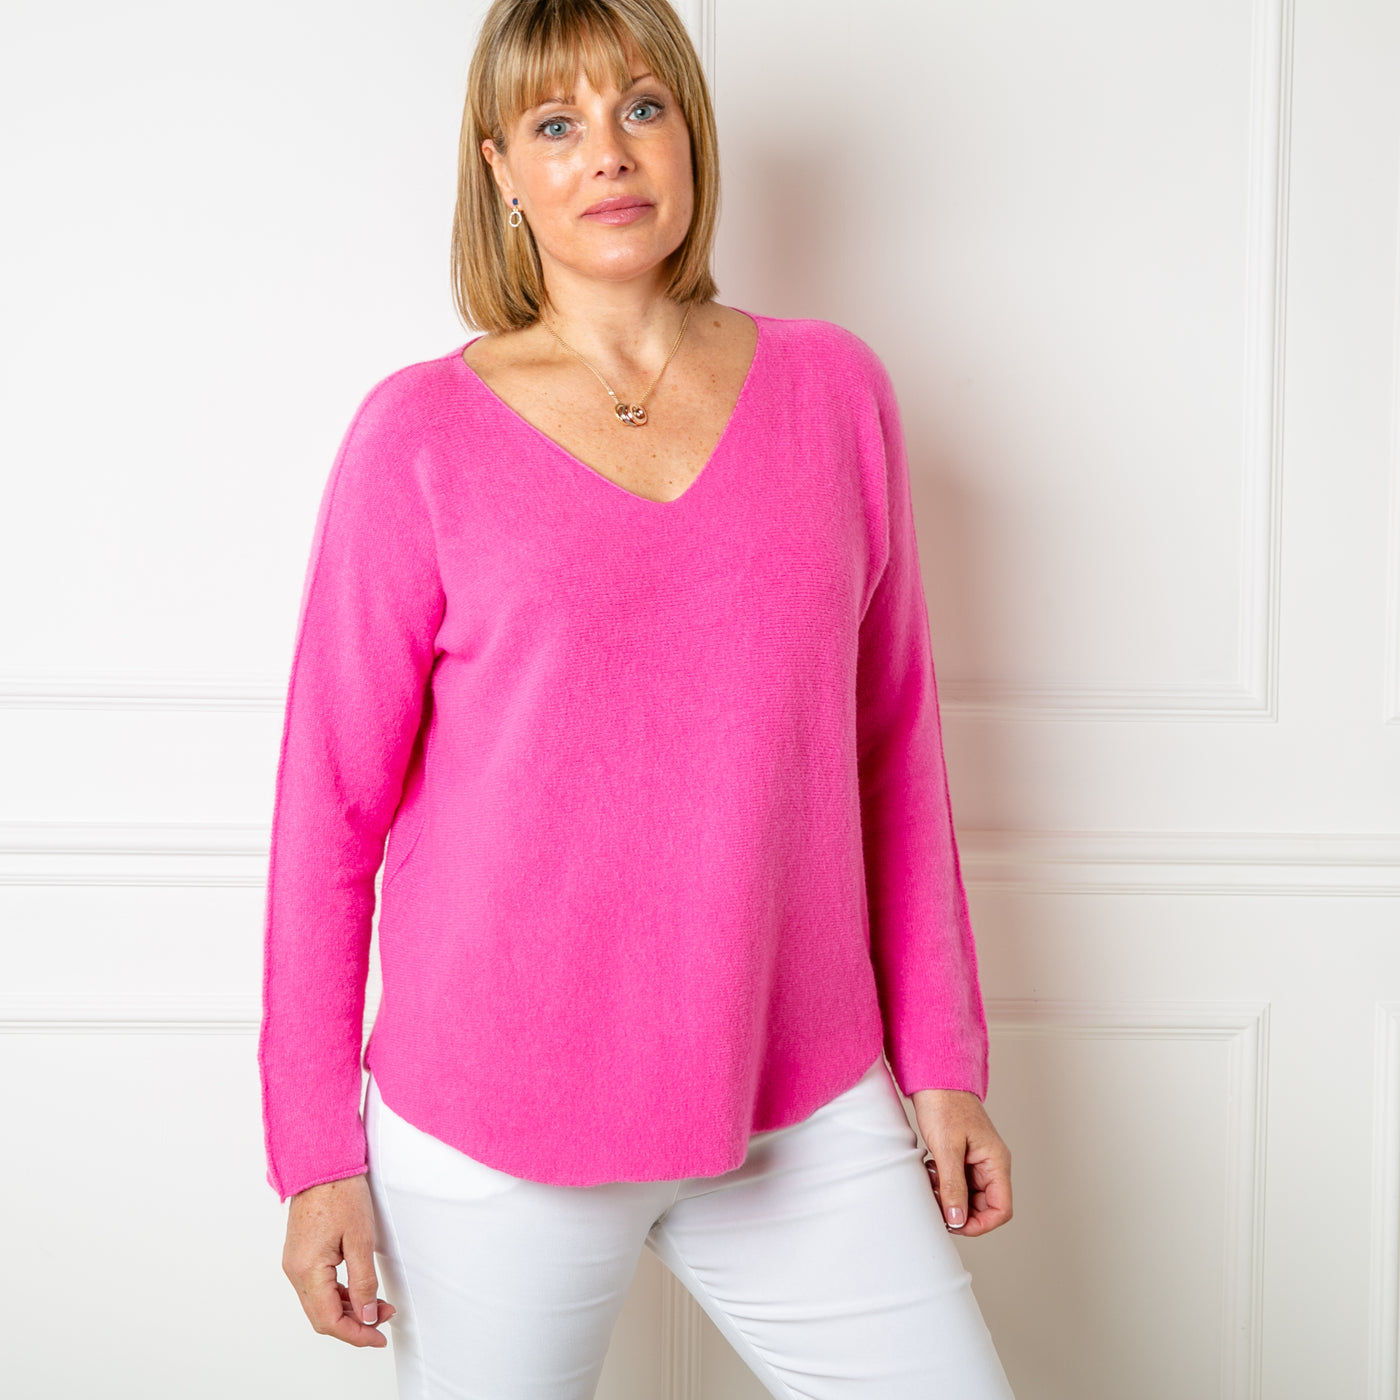 The fuchsia pink Soft V Neck Jumper with long sleeves and statement seam detailing from the shoulder down